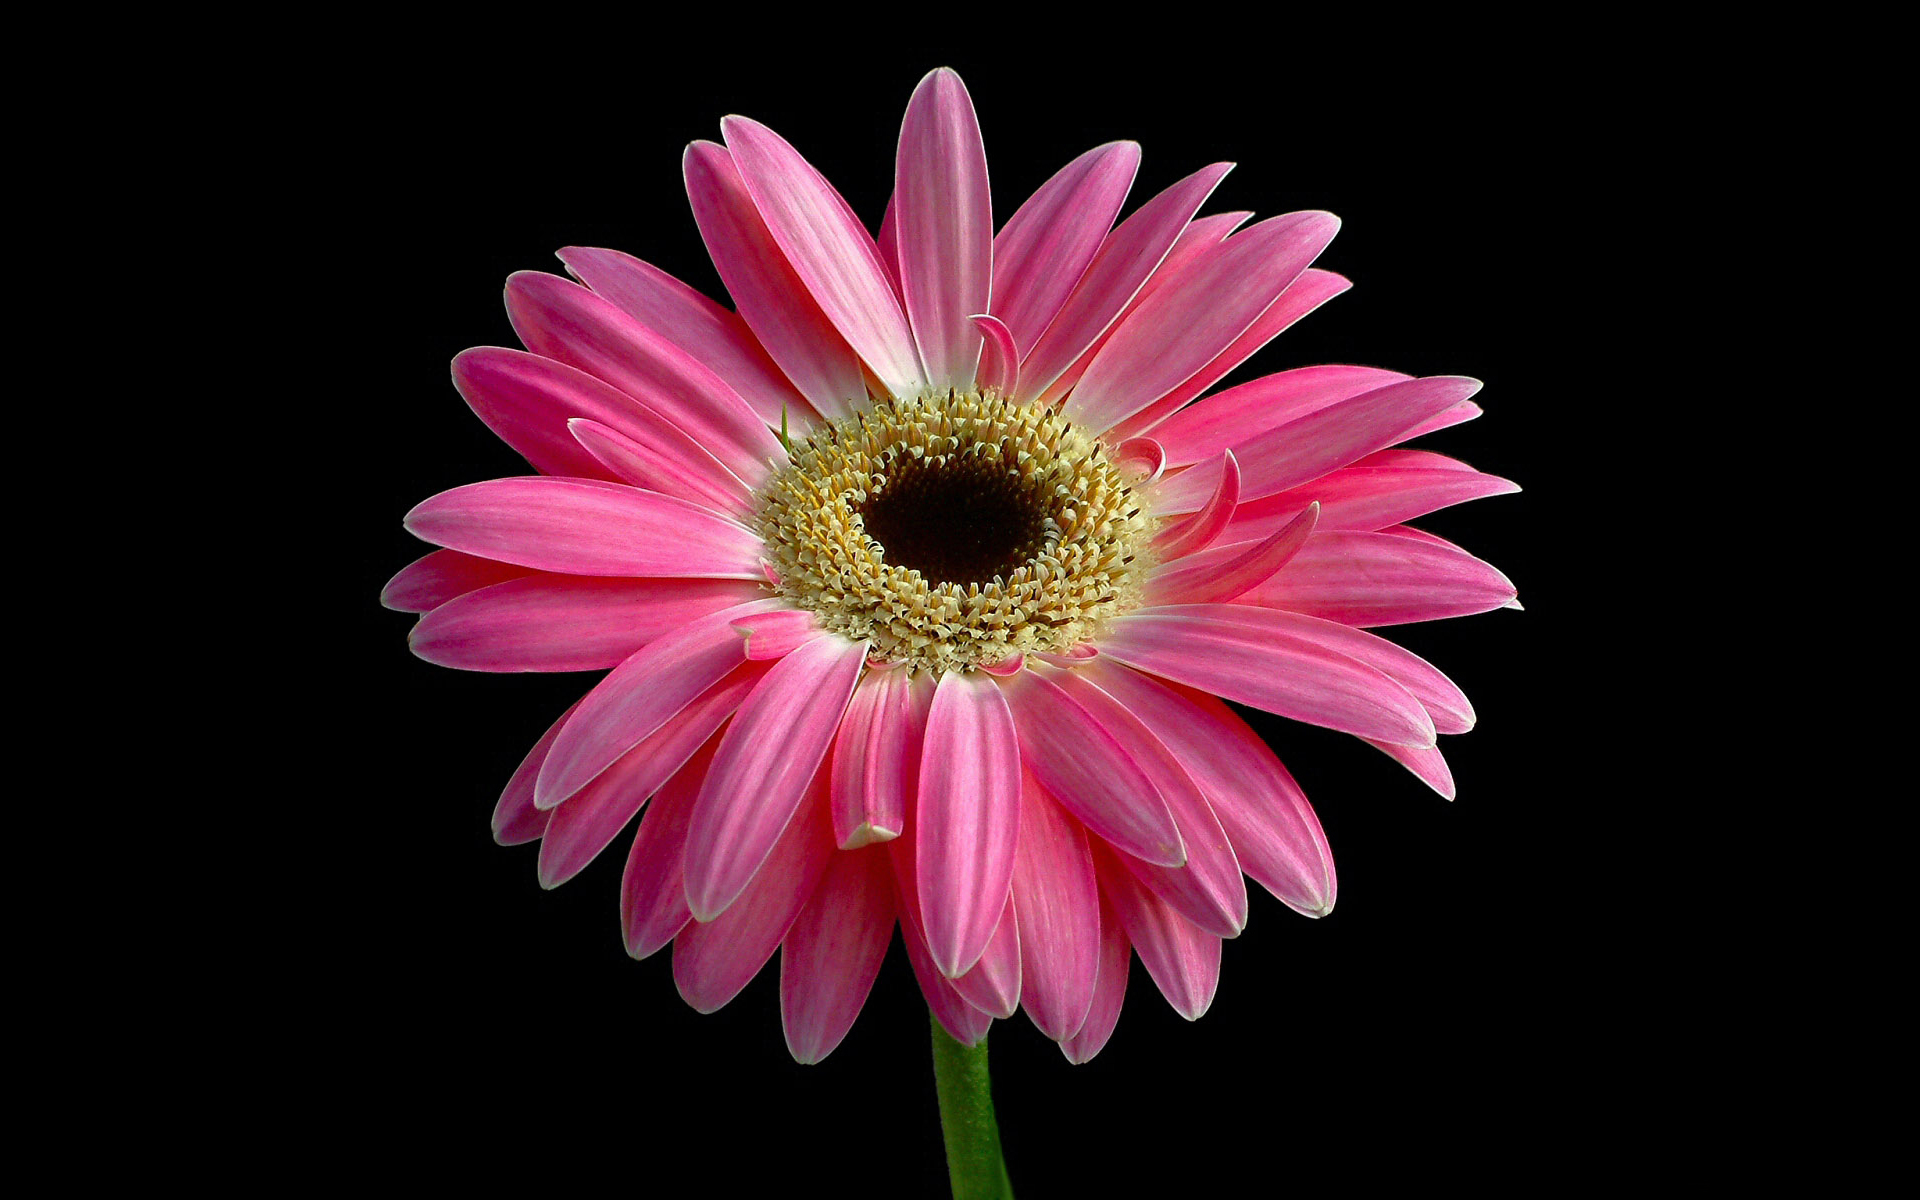 The Most Beautiful Pink Flower Wallpaper | HD Wallpapers